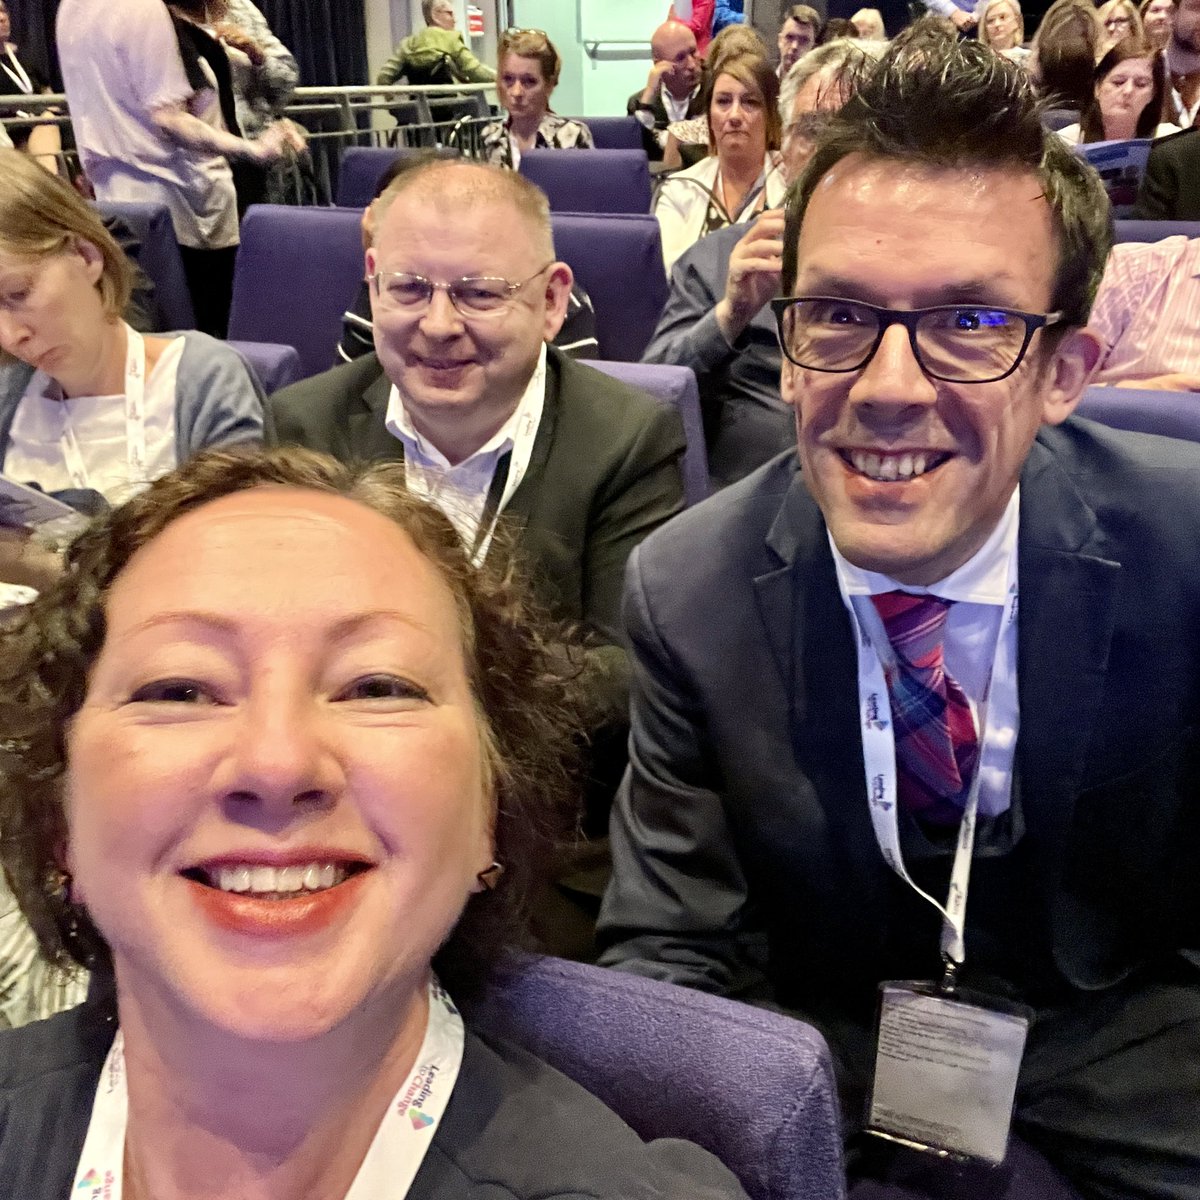 Apart from the learning, lovely to catch up with friends & colleagues. Enjoyed seeing  #ProjectLift (now @L2CScot ) #LeadershipCubed 🦋Cohort3 @ScottHeald72 & @nelsonkennedyk & across cohorts with @MMorrisonNHS & the glamorous @ManiraAhmad (& Mrs Ahmad too) #nhsscot23 #NhsScot75